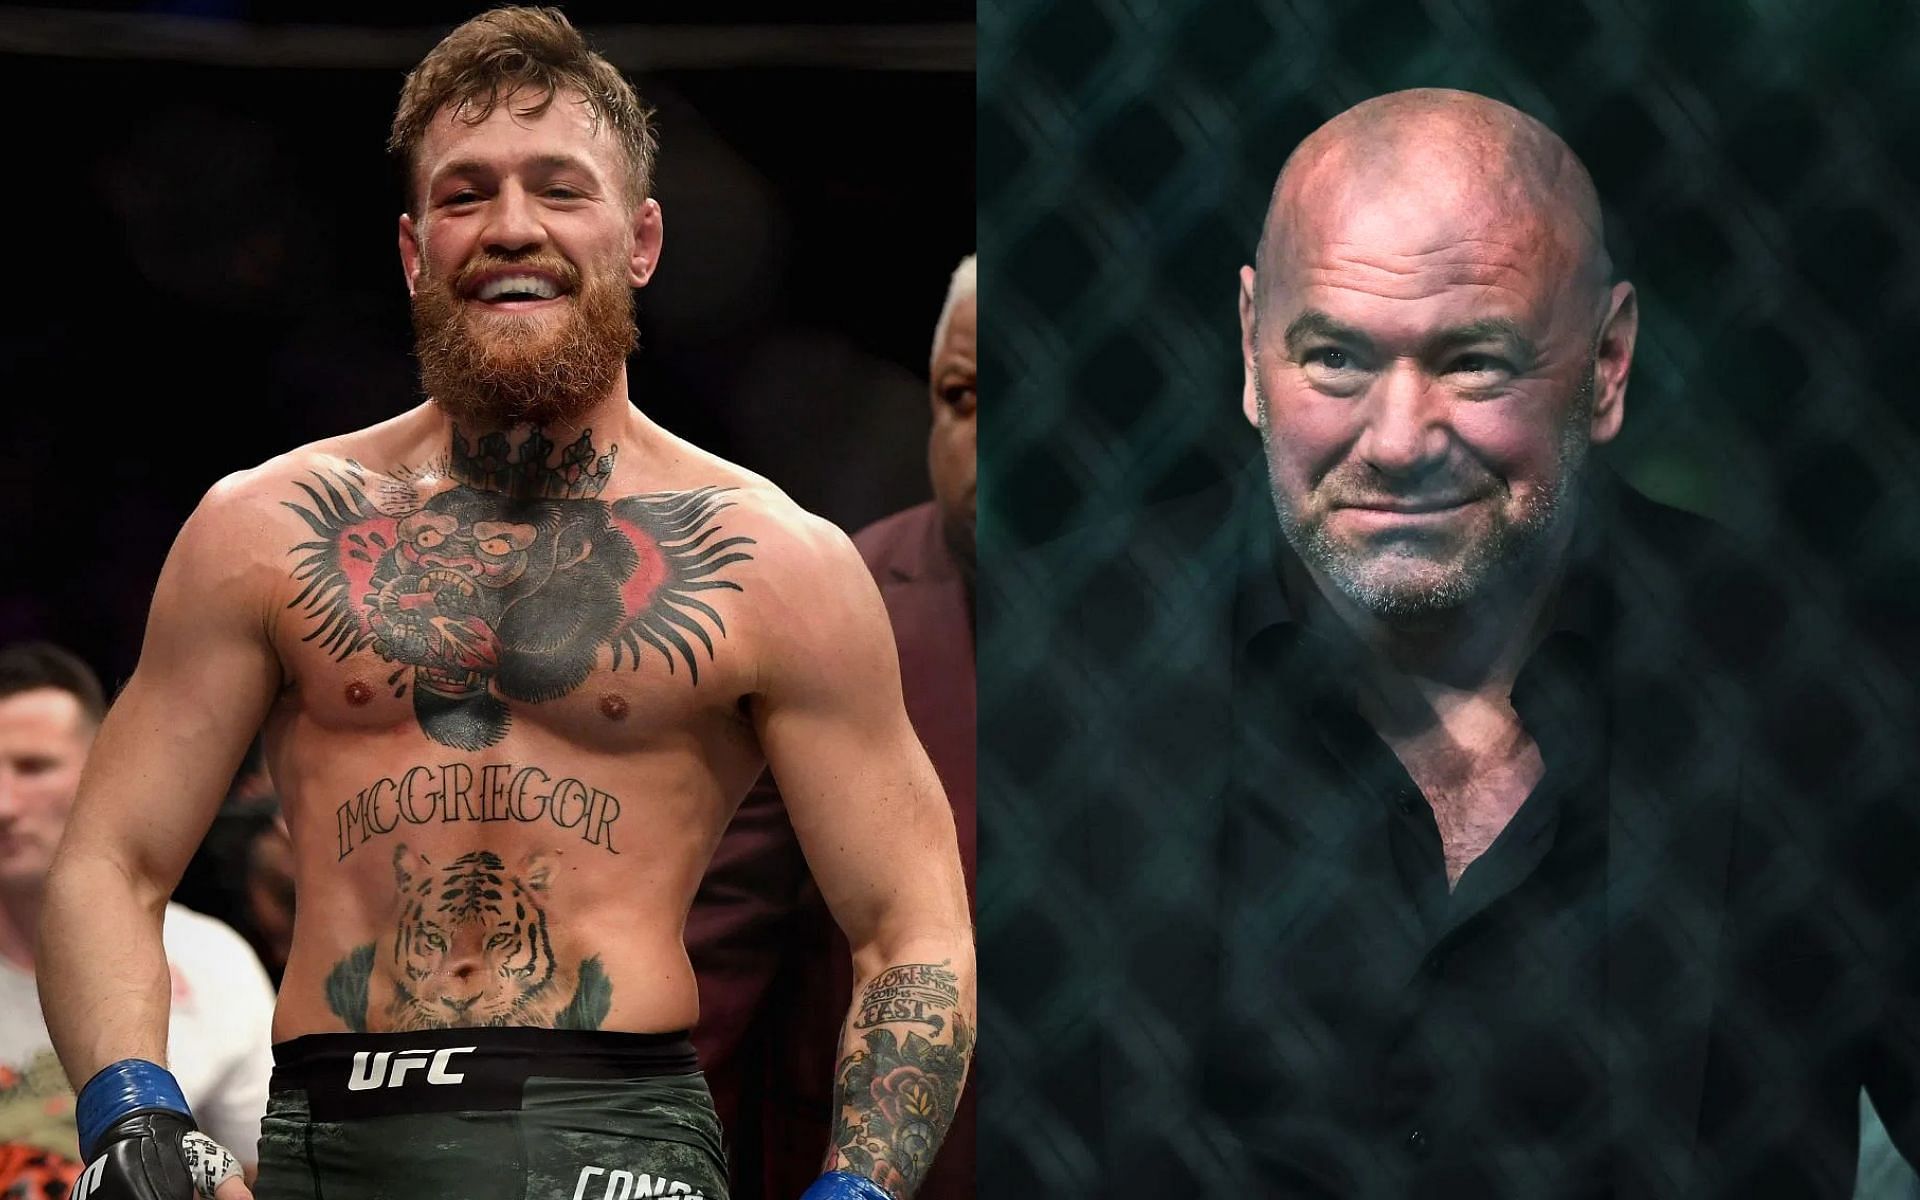 Conor McGregor (left) must return to the UFC no matter what it takes Dana White (right), says Matchroom Boxing chairman Eddie Hearn [Images Courtesy: @GettyImages]